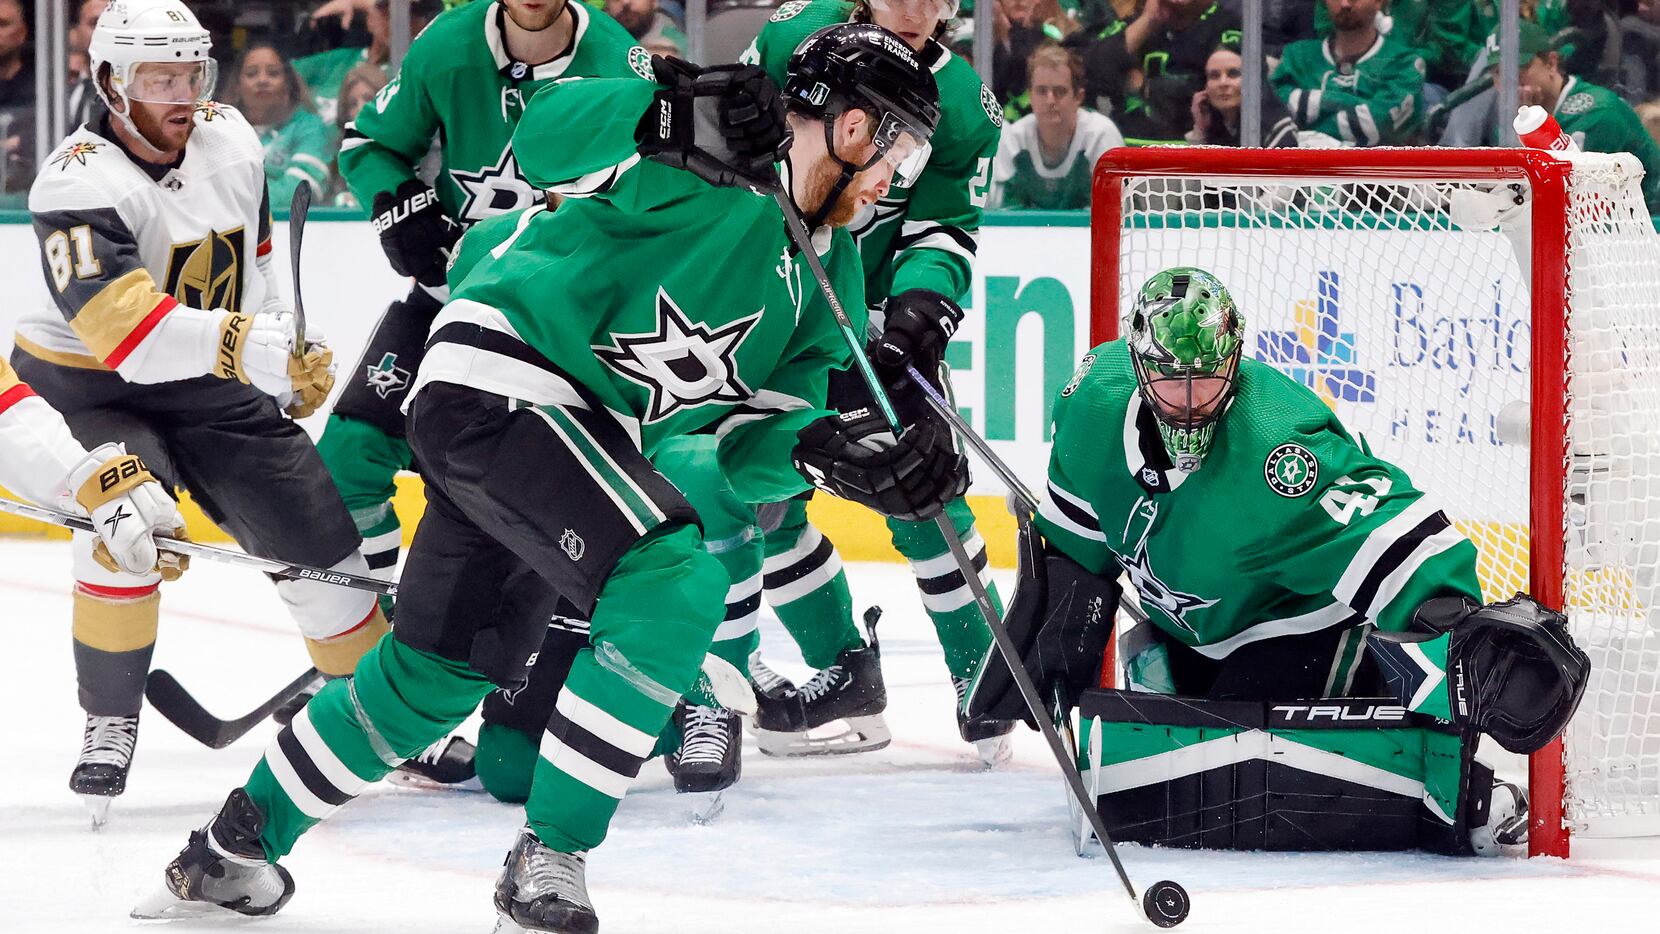 Jamie Benn, Dallas Stars captain, ejected from Game 3